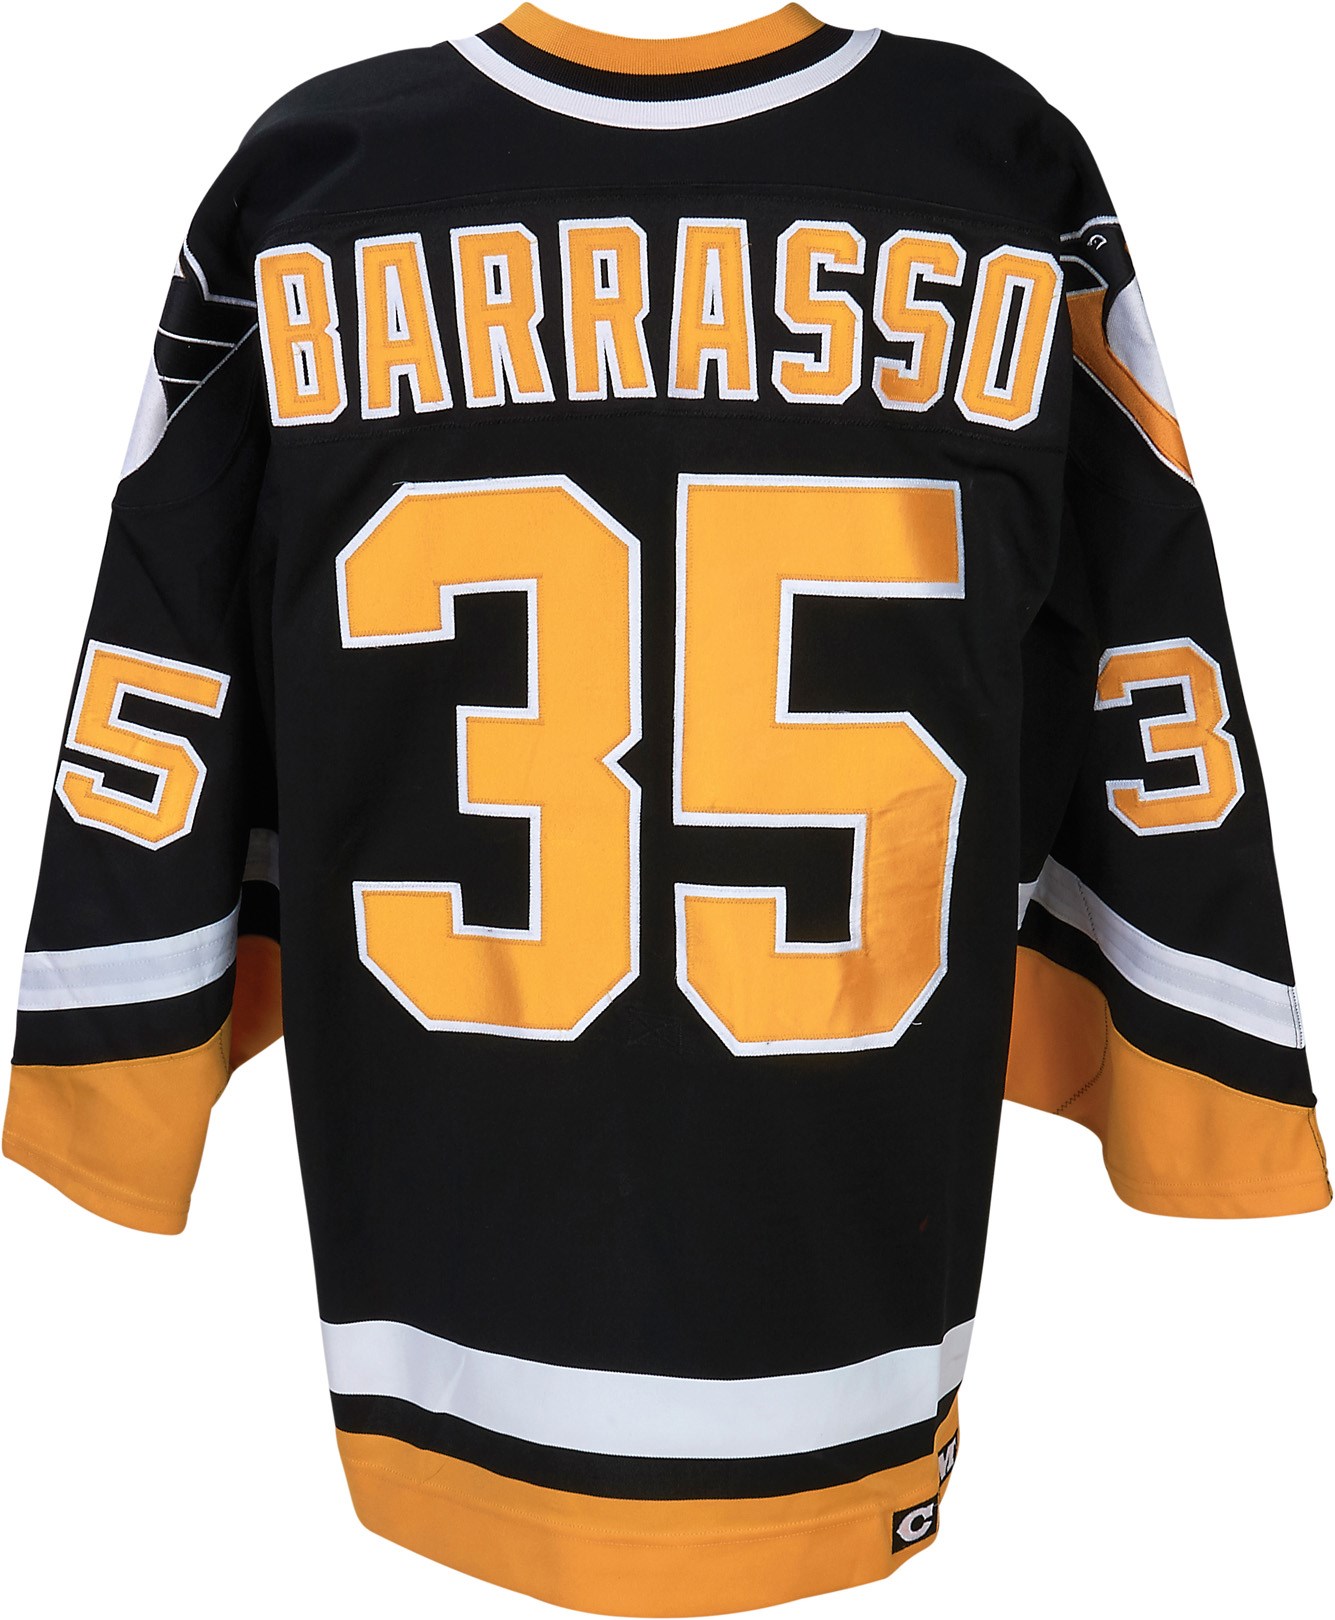 1996-97 Tom Barrasso Pittsburgh Penguins Game Worn Jersey (Photo-Matched)